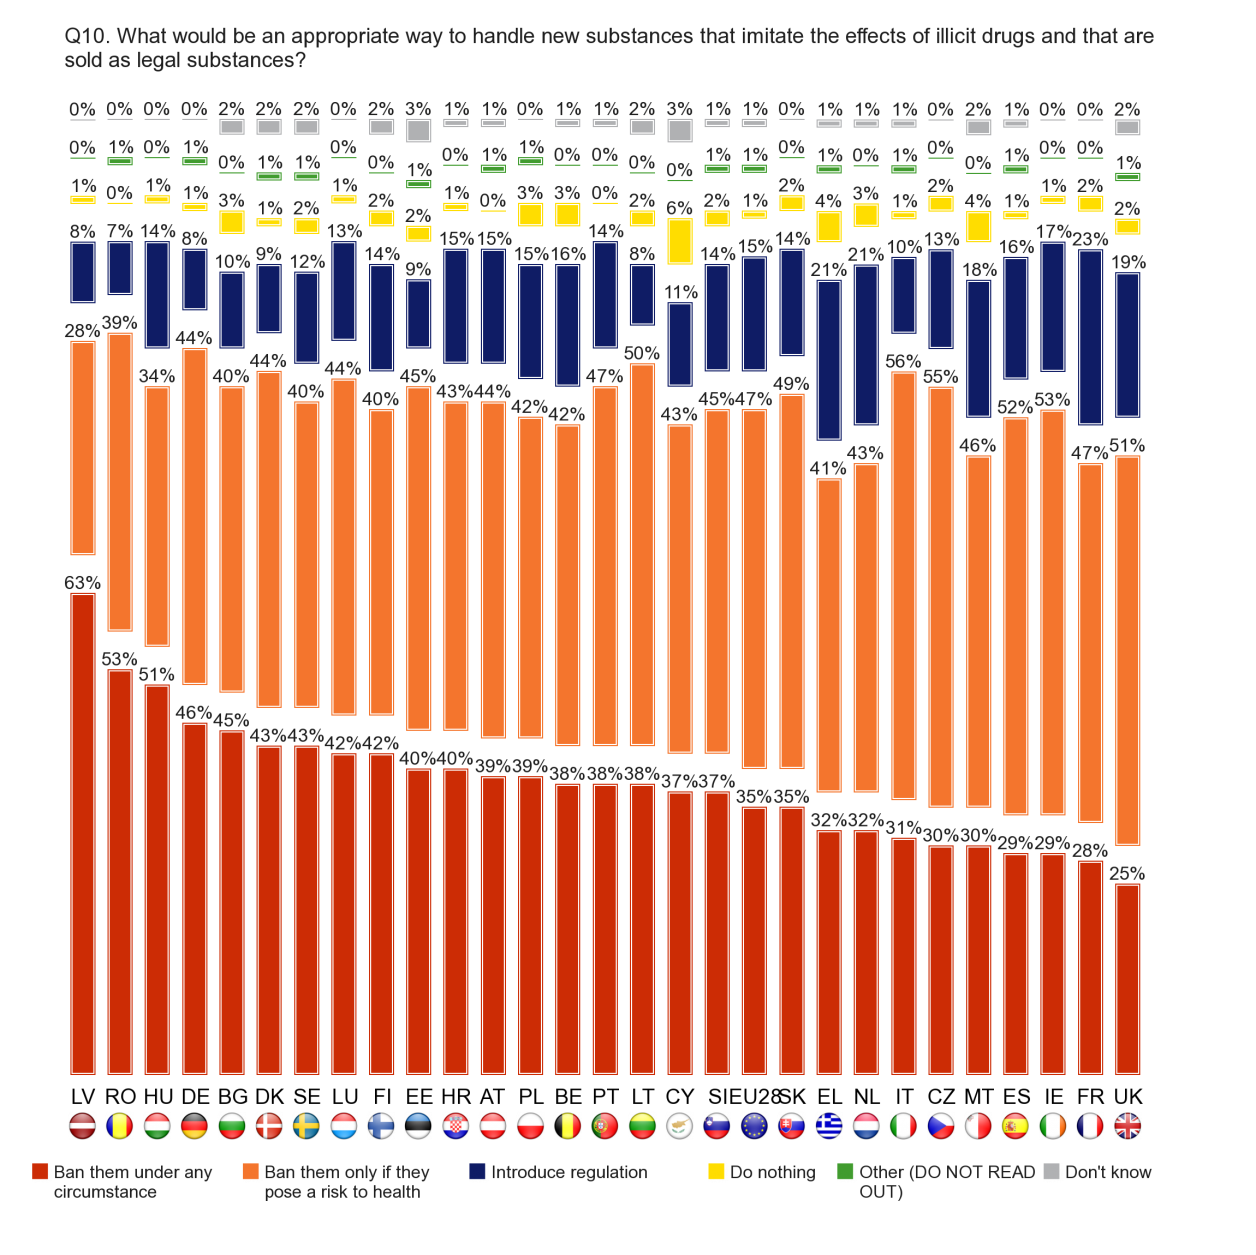 FLASH EUROBAROMETER Latvia (63%), Romania (53%) and Hungary (51%) are the only Member States where a majority think these new substances should be banned under any circumstances.